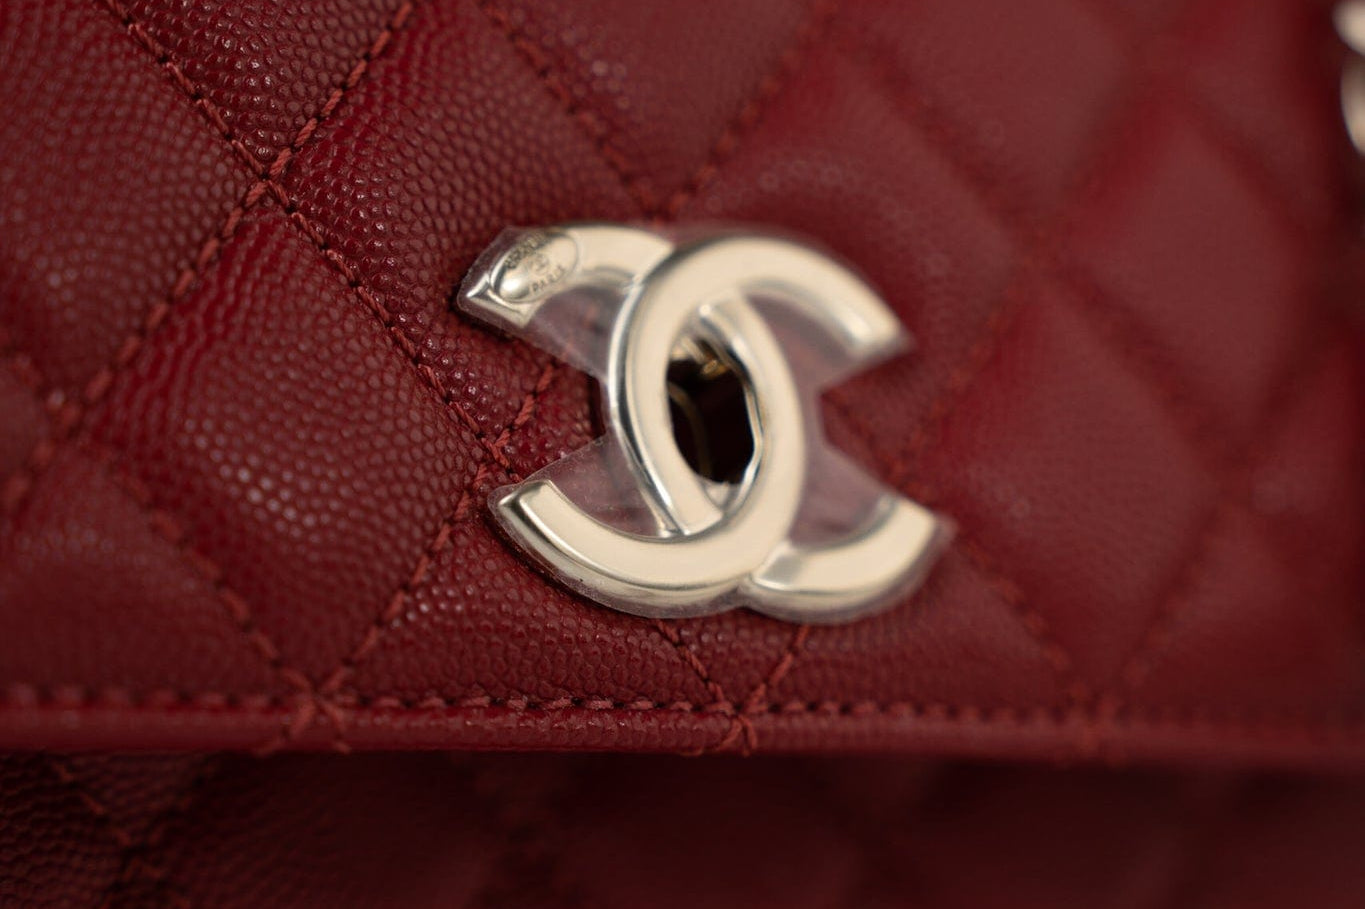 CHANEL Handbag 22K Red Caviar Quilted Coco Handle Medium (Old Small) Light Gold Hardware - Redeluxe